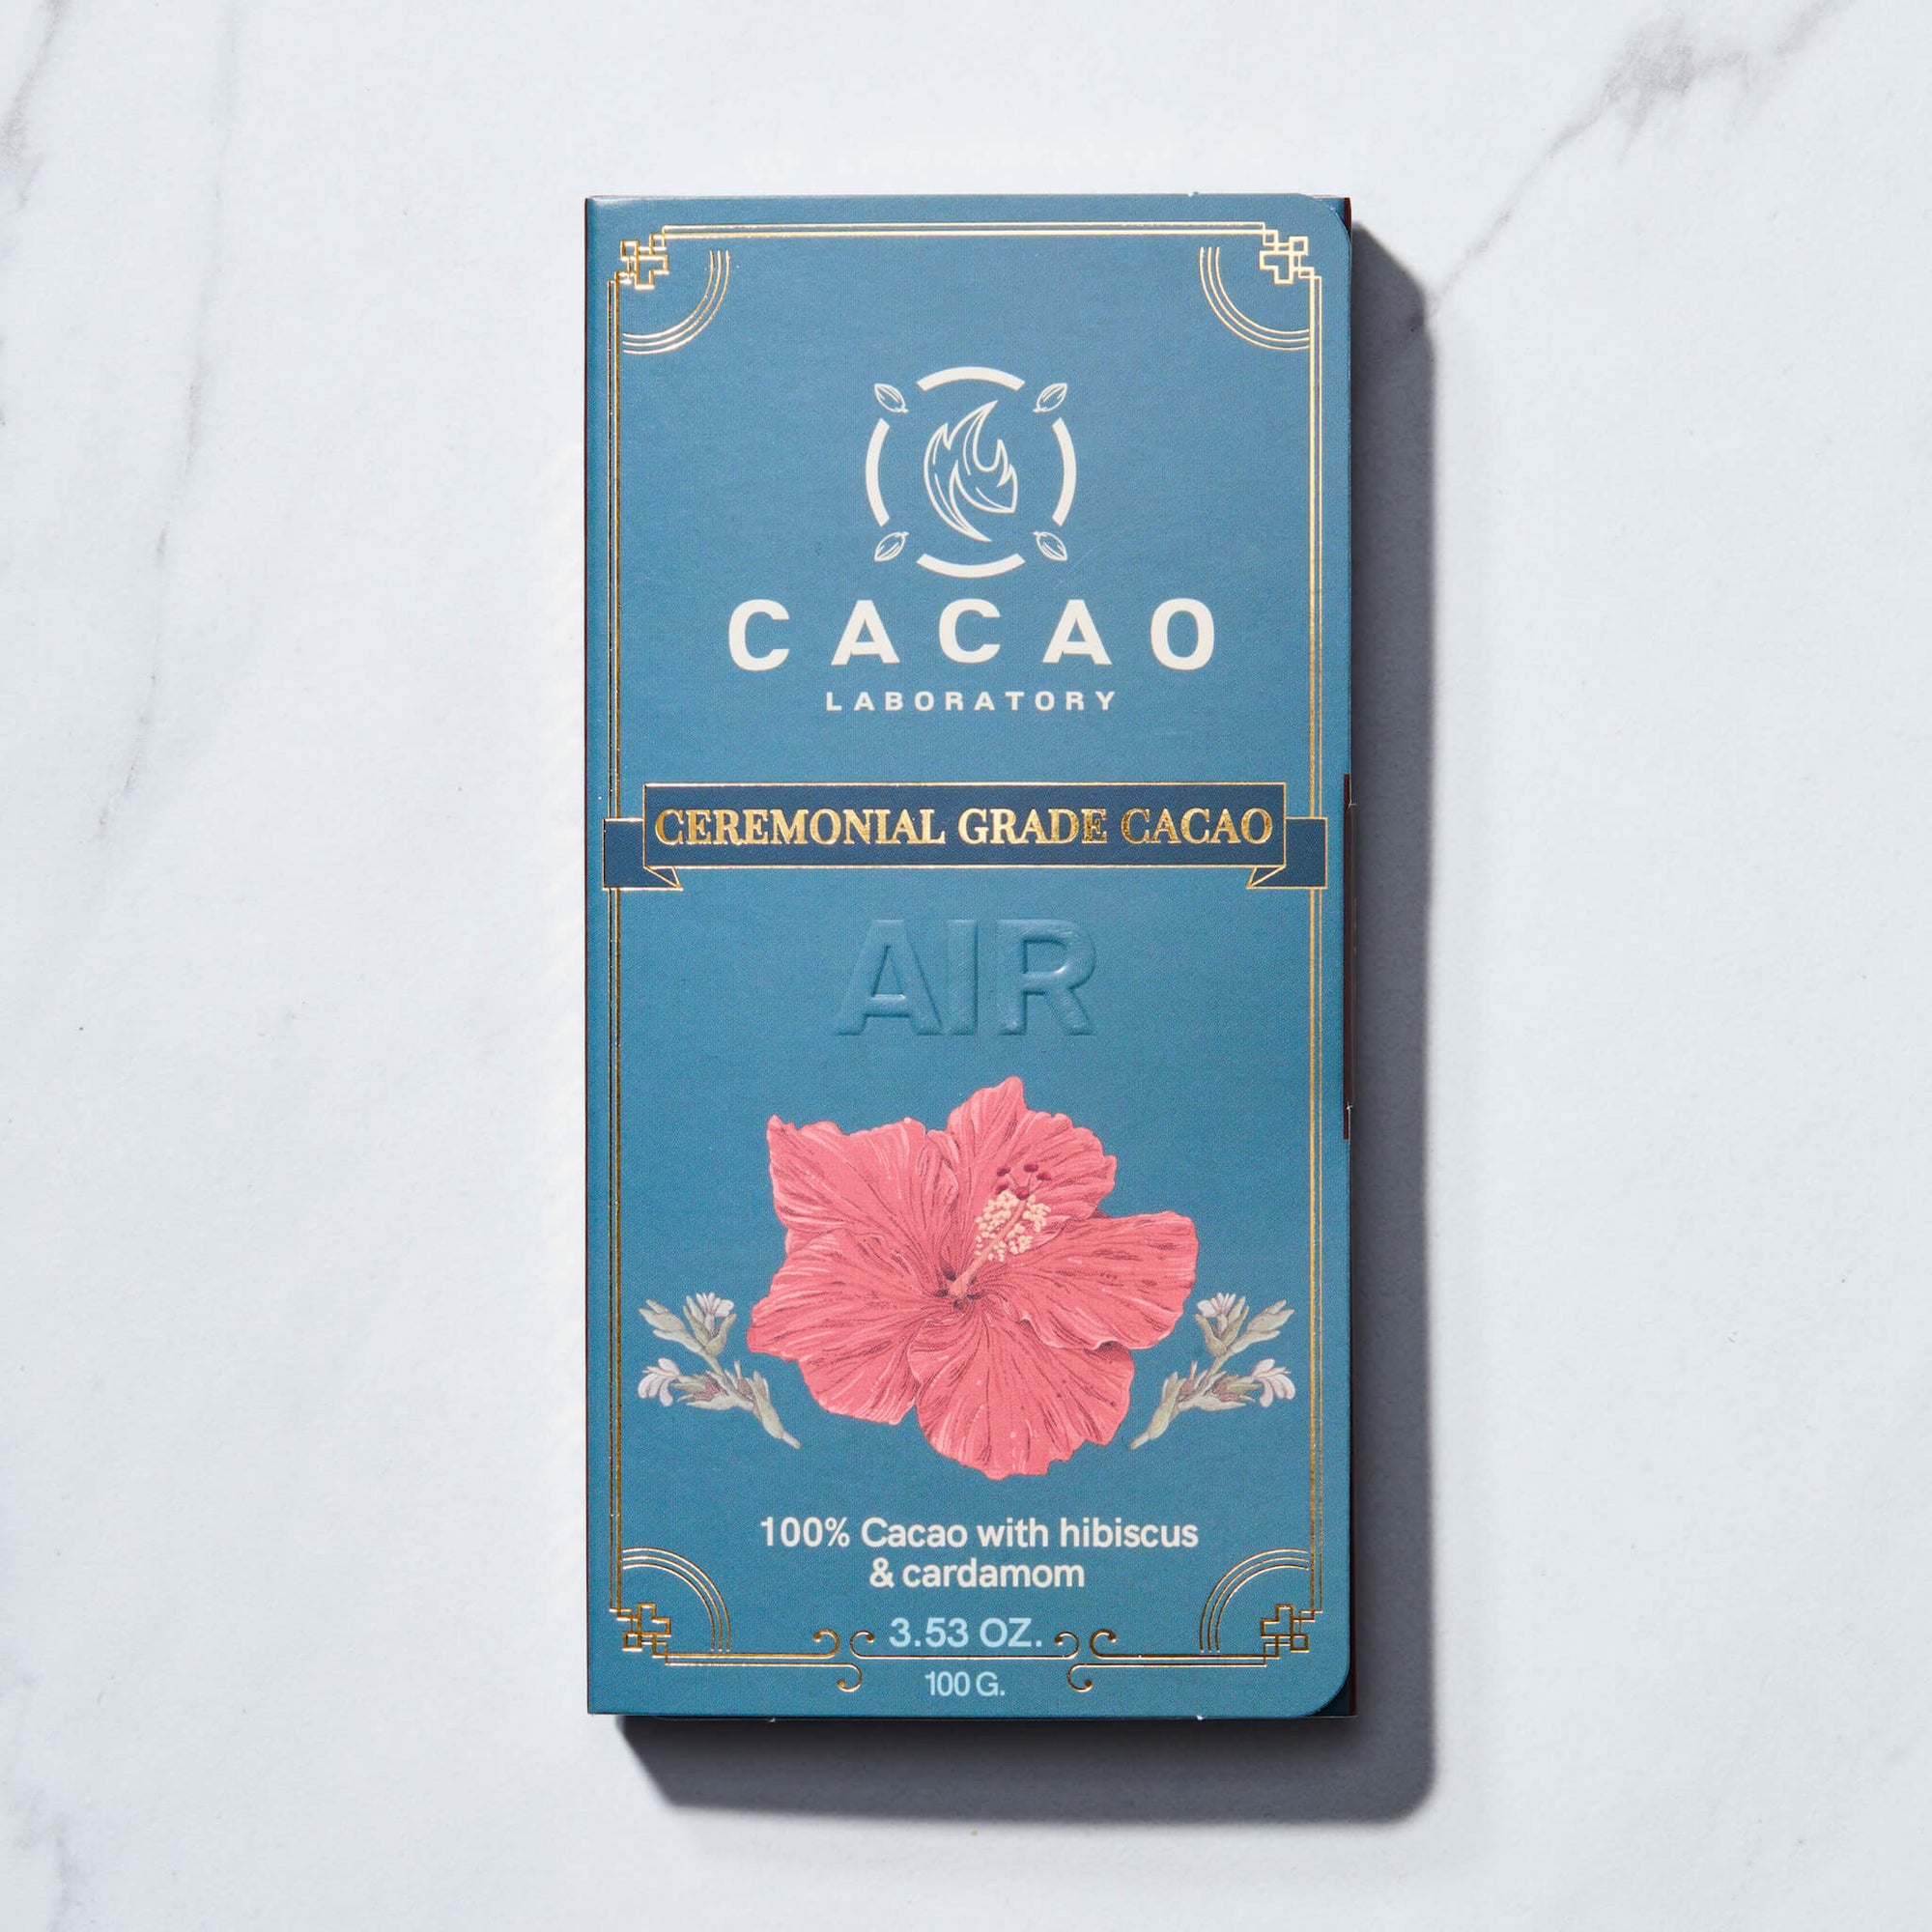 Cacao Laboratory Ceremonial Cacao - Air Element: Invoke Your Compassion with Hibiscus and Cardamom